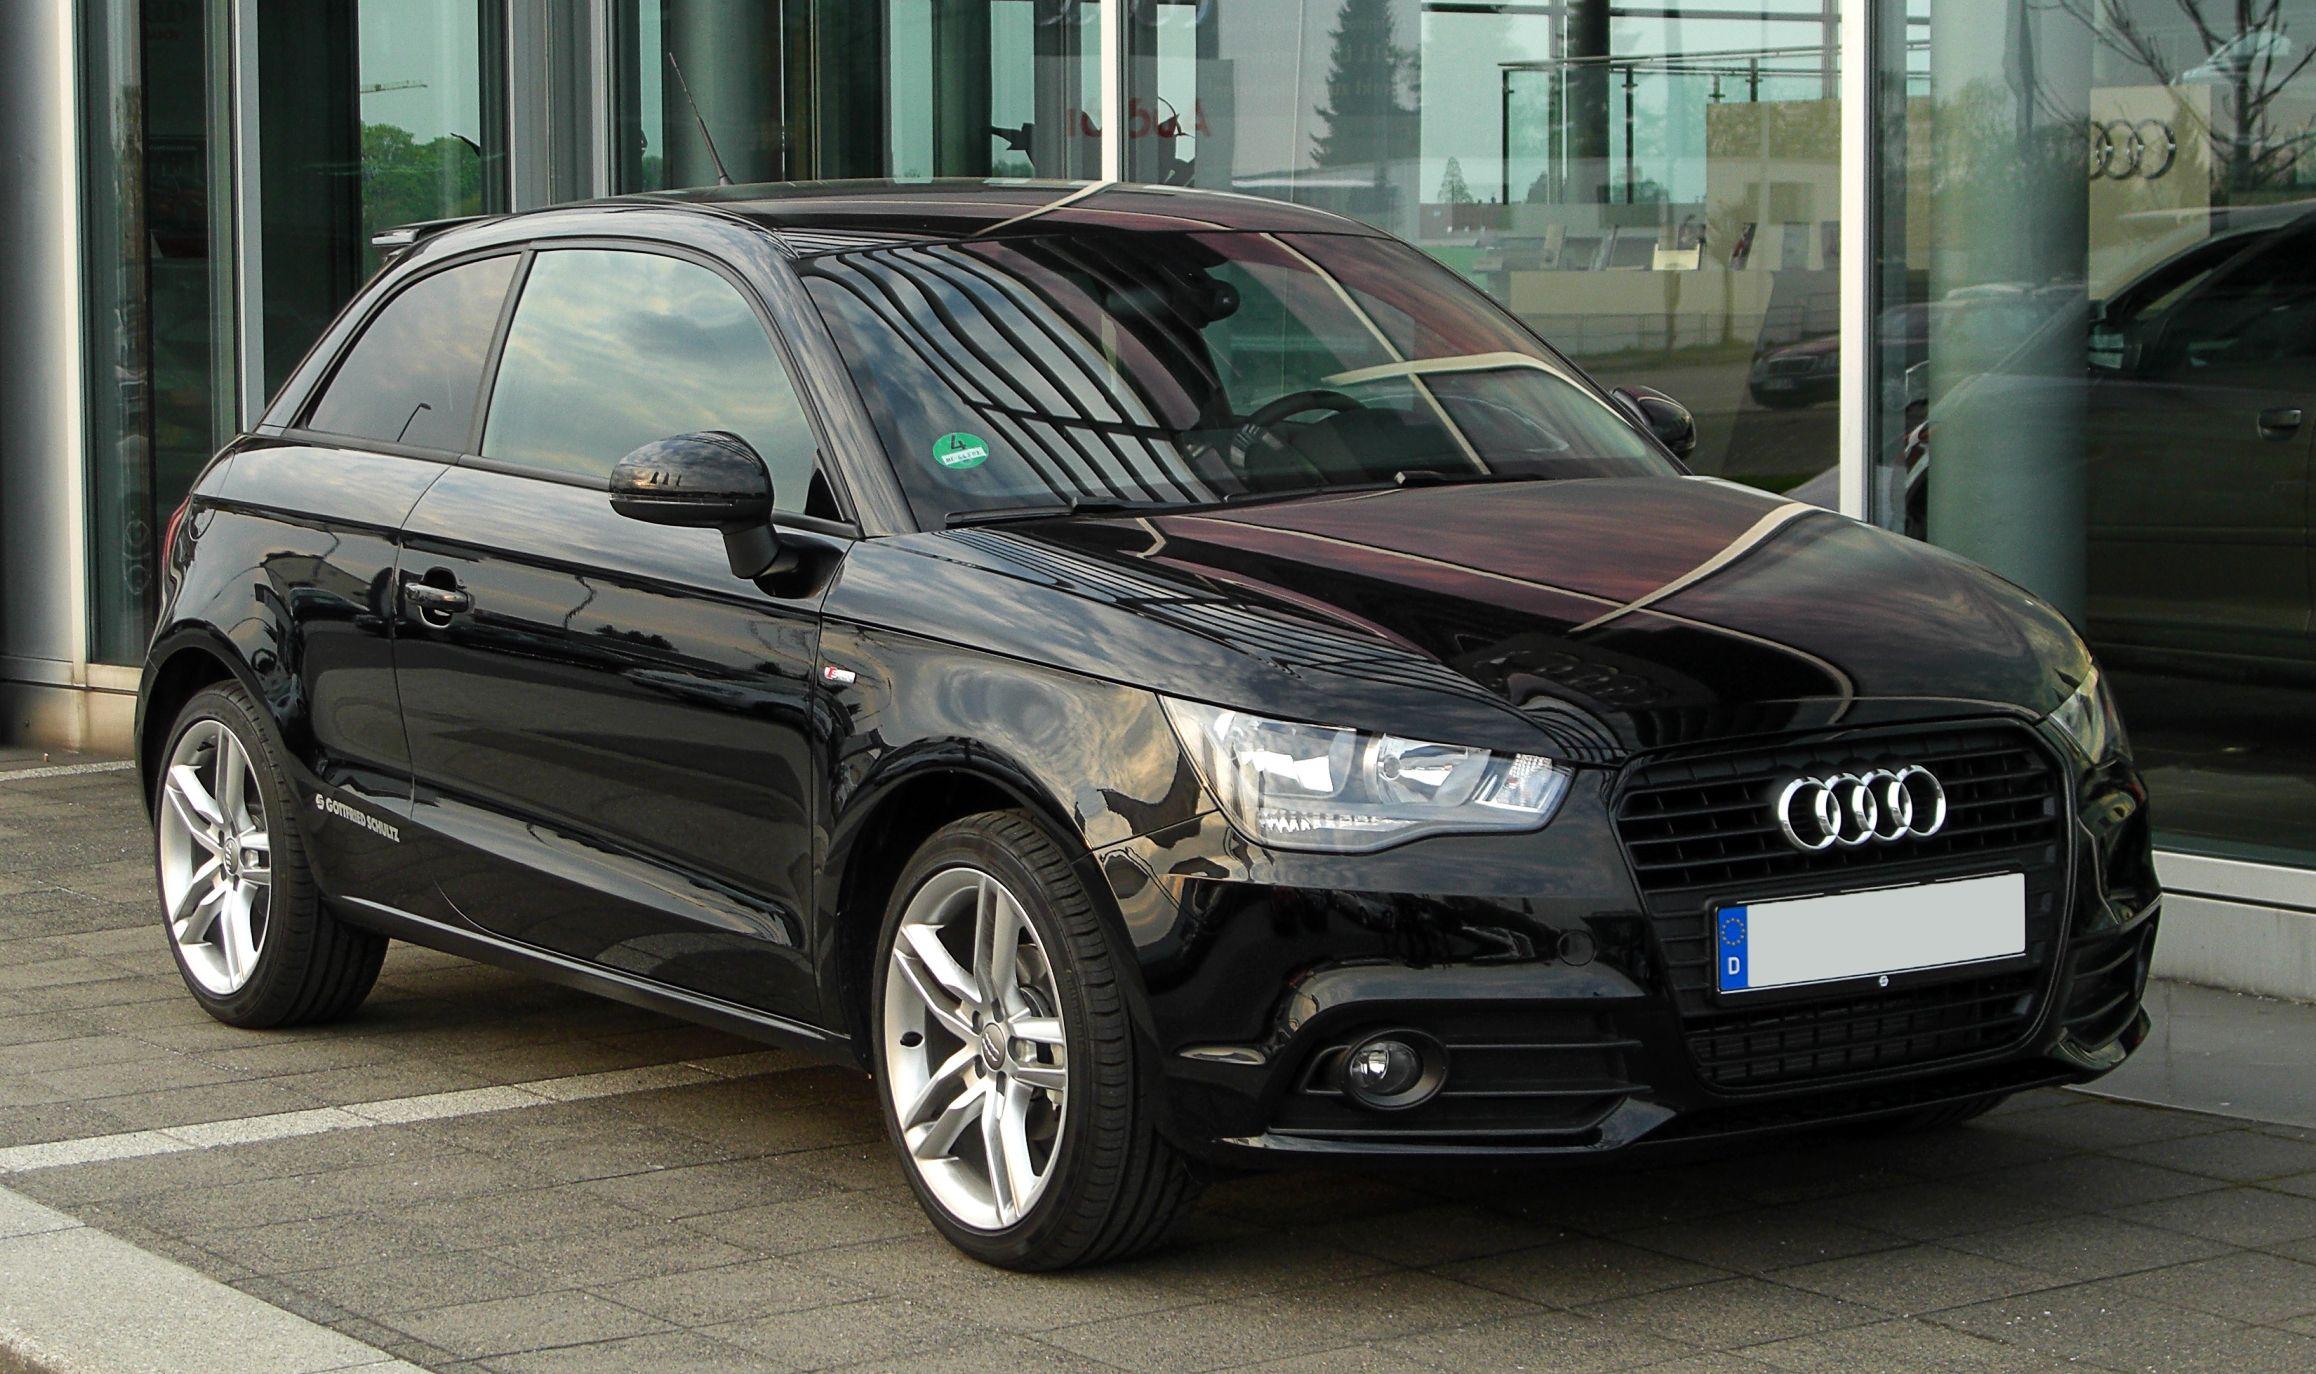 Audi A1 Wallpaper Image Photo Picture Background